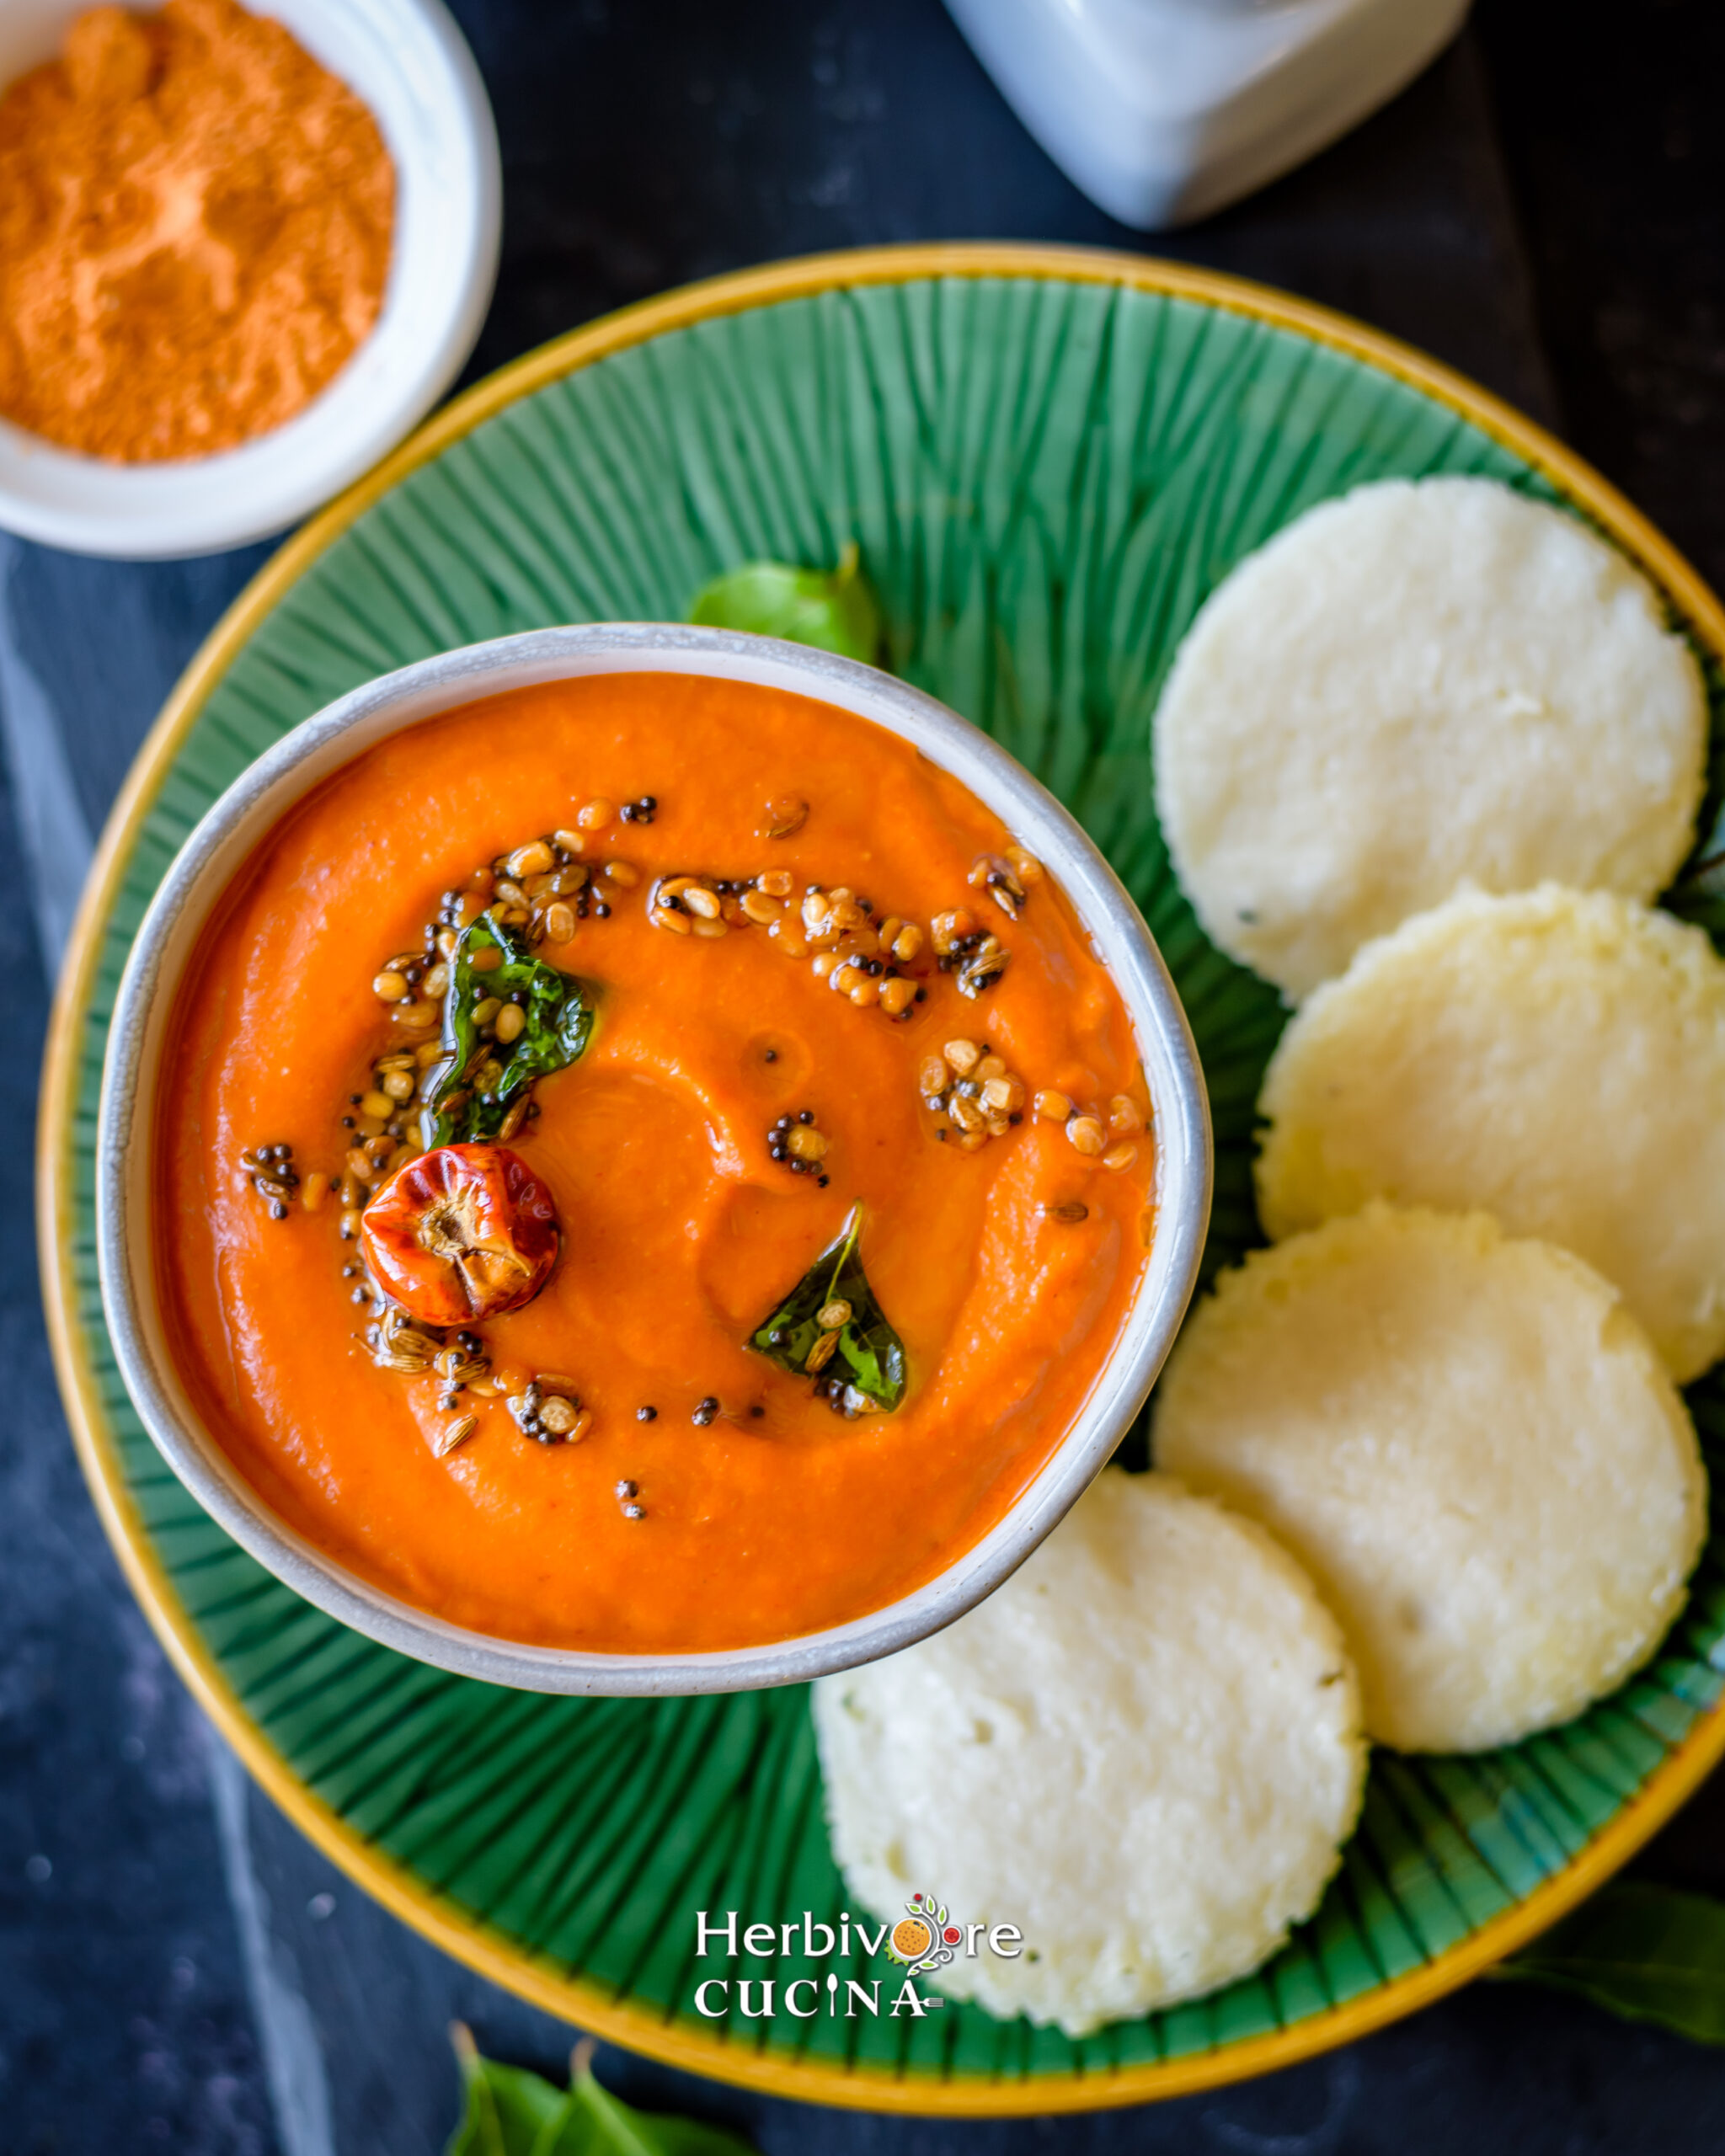 Top view of roasted tomato onion chutney with idli served in a green plate on a dark background.